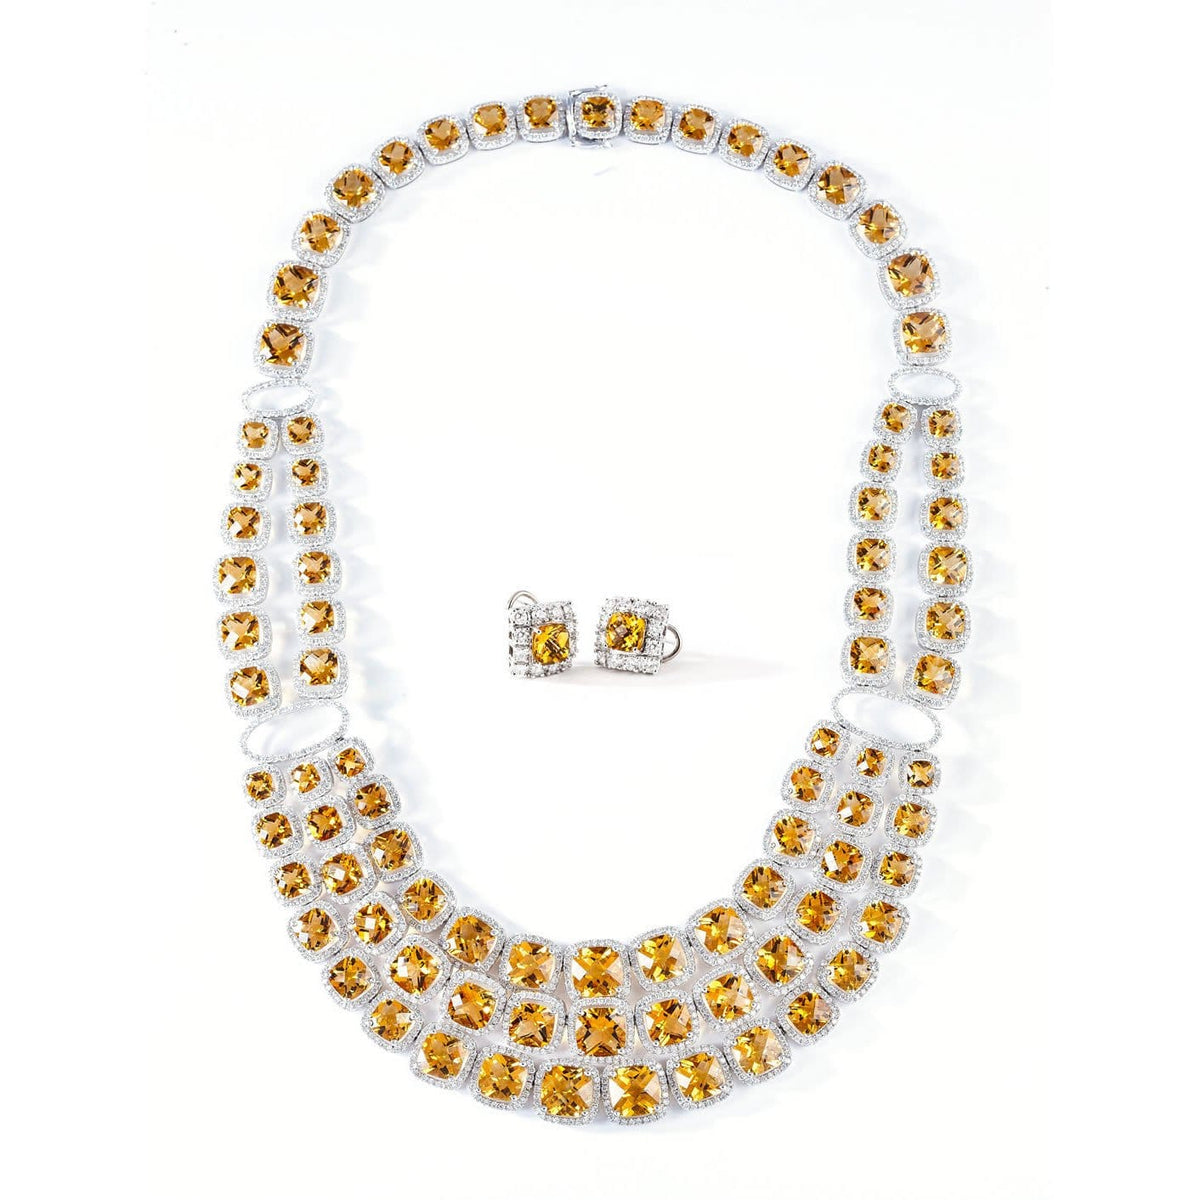 CITRINE GEMSTONES NECKLACE SET - GRACE TO GLORY - Chris Aire Fine Jewelry & Timepieces